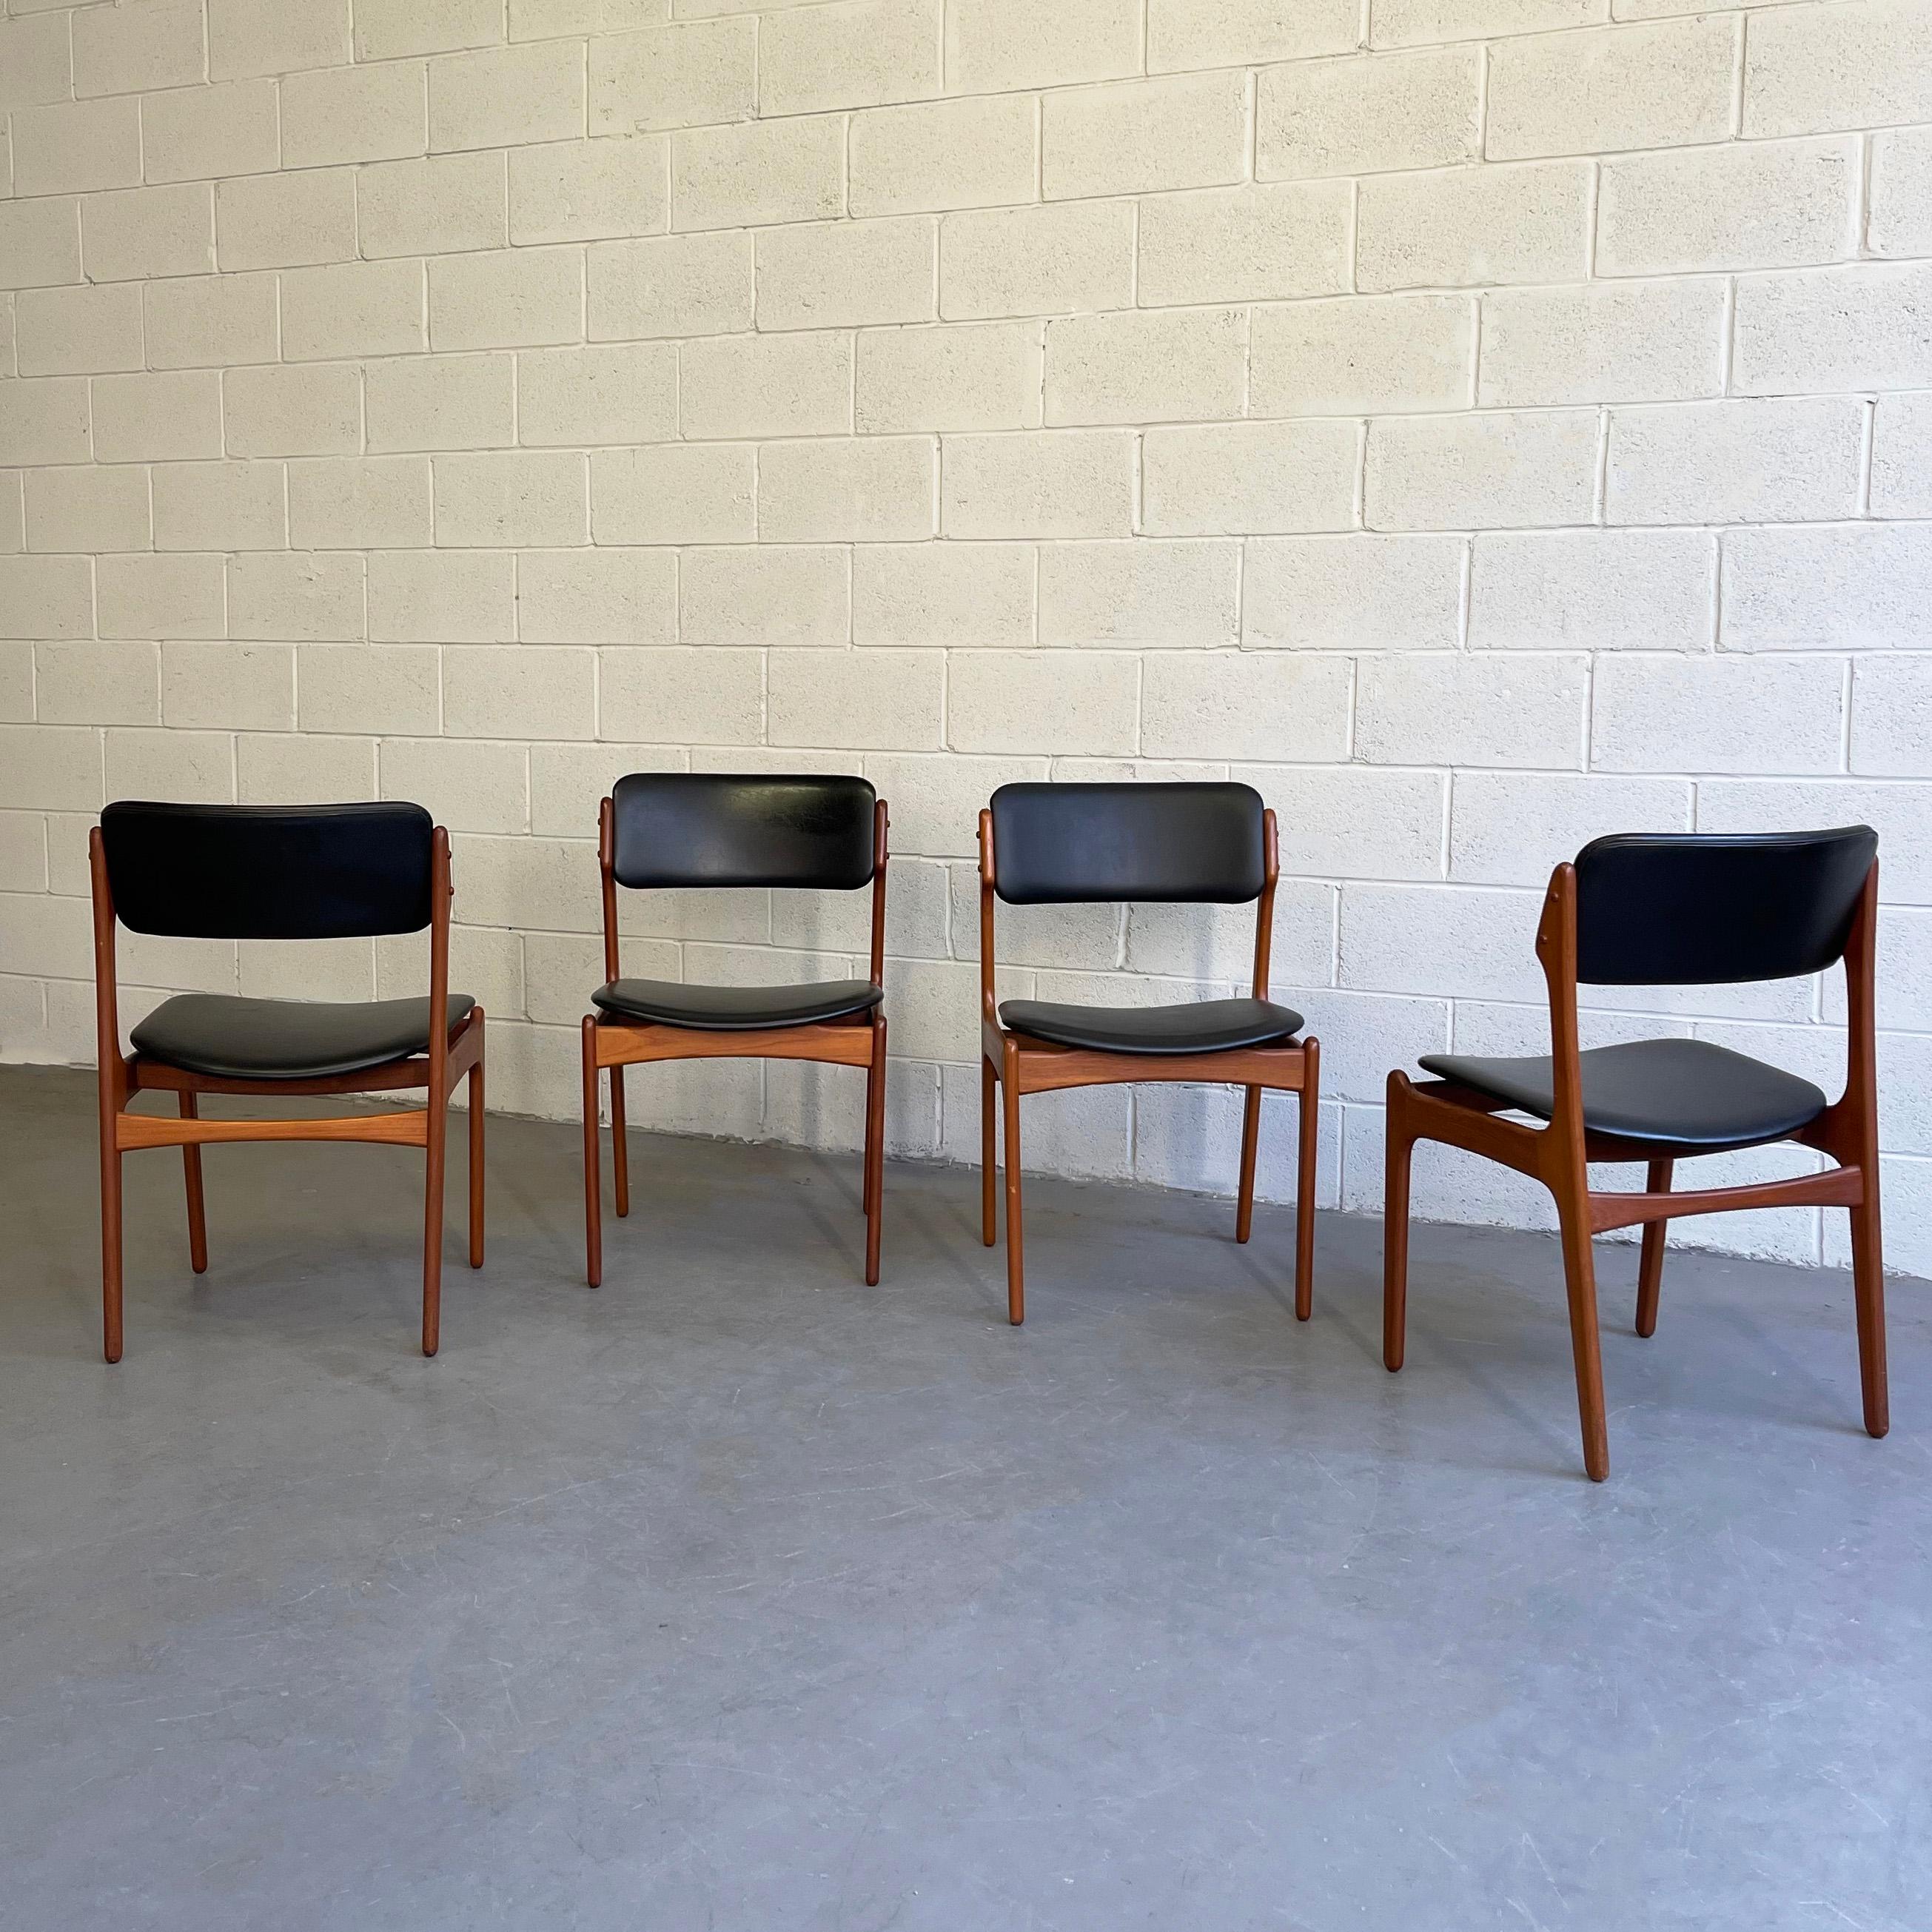 20th Century Danish Modern Teak Dining Chairs by Erik Buch for O.D. Mobler